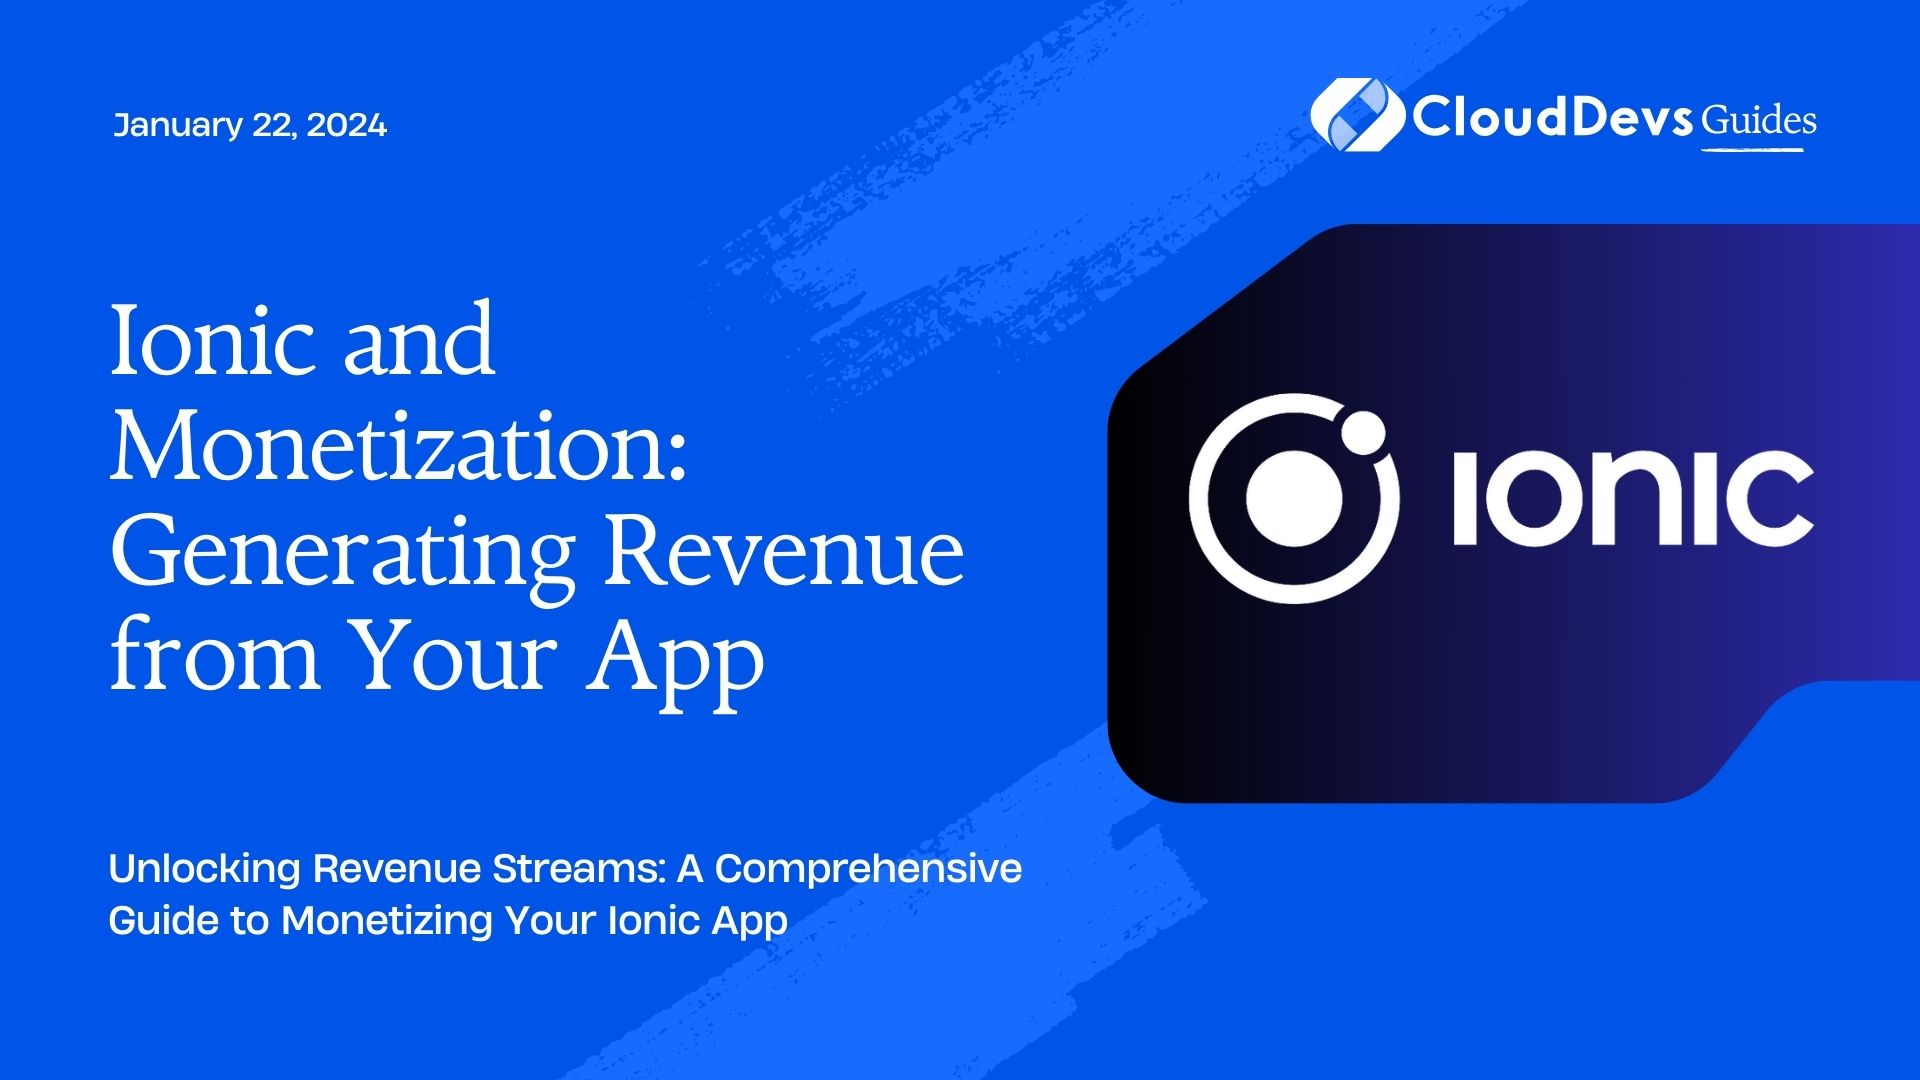 Ionic and Monetization: Generating Revenue from Your App